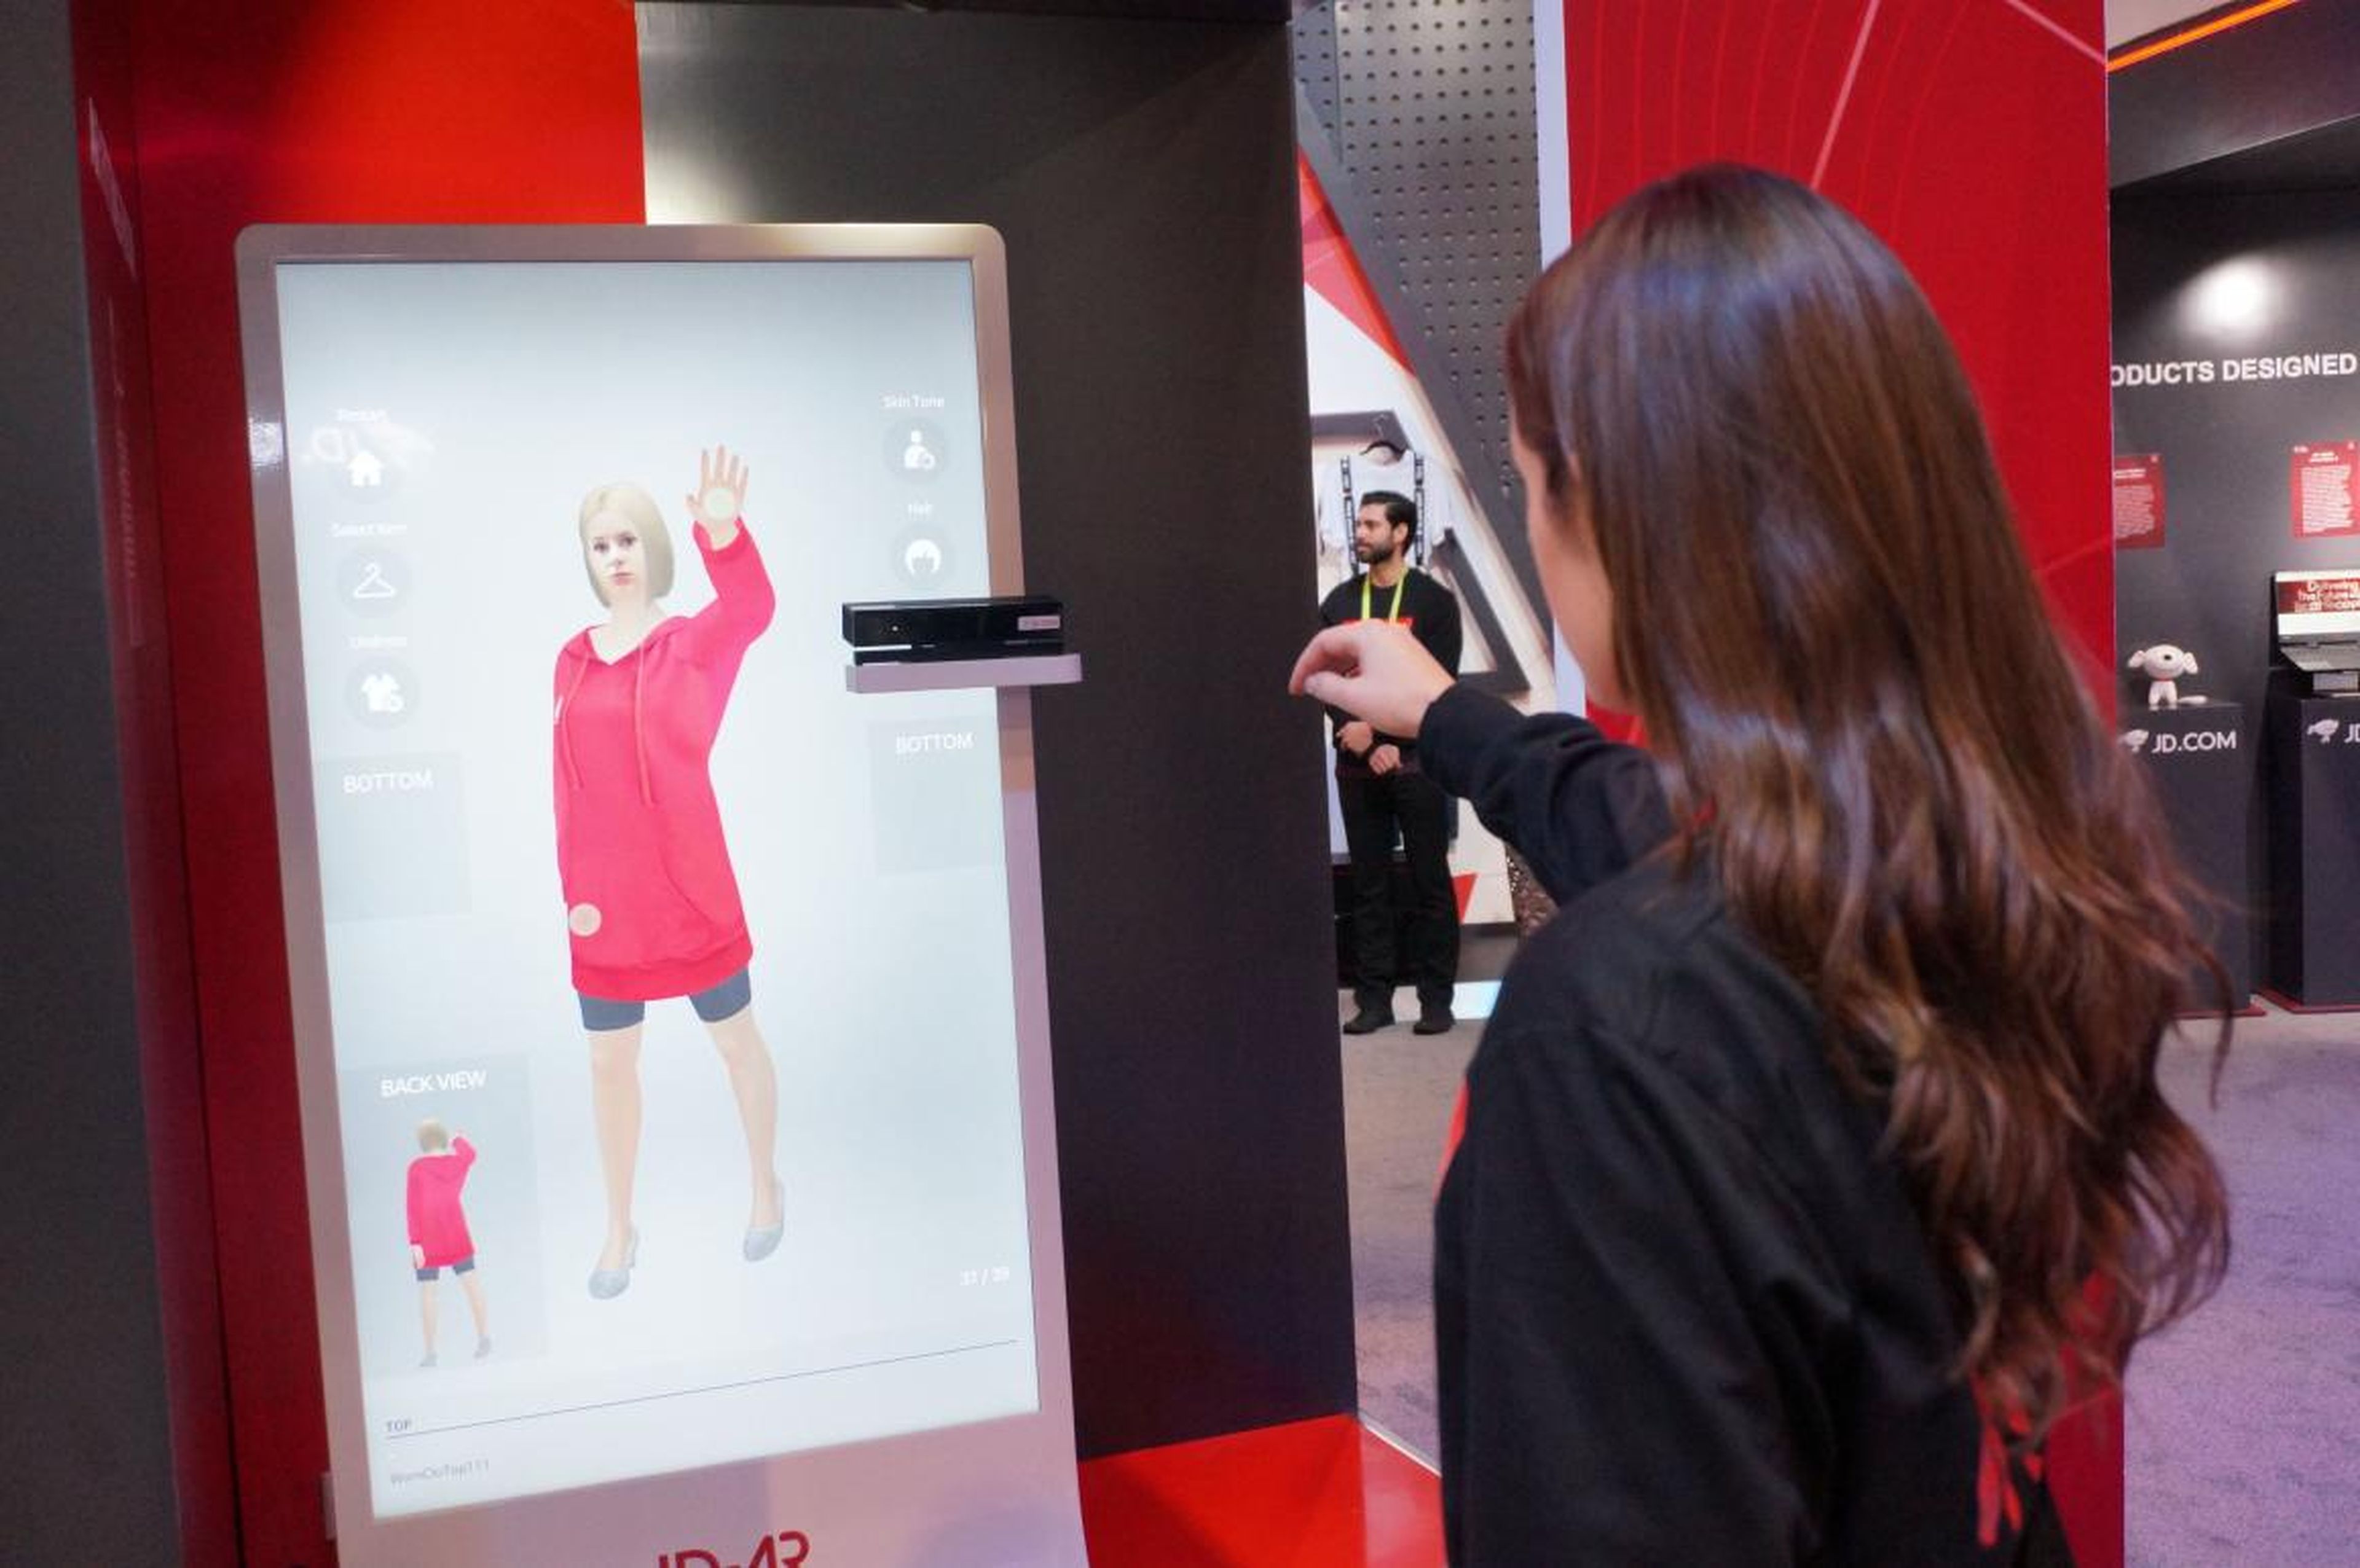 JD.com shows off an augmented reality system which lets customers virtually try on clothing.